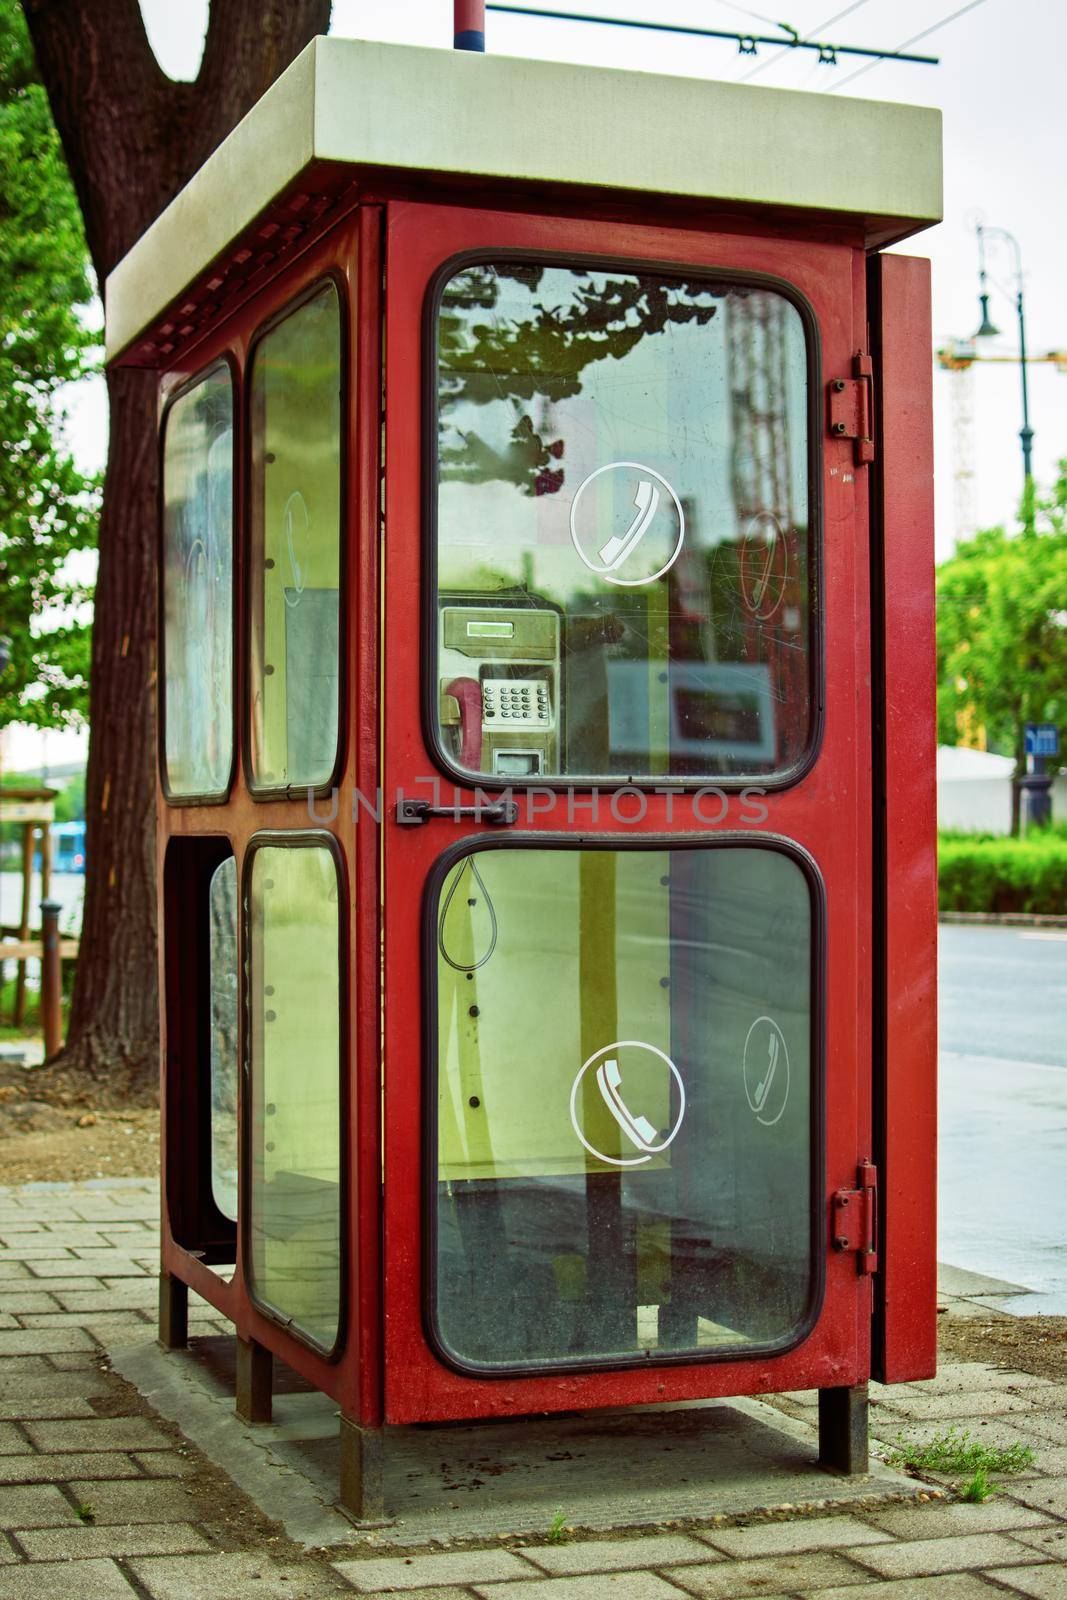 An old public phone booth by Mendelex